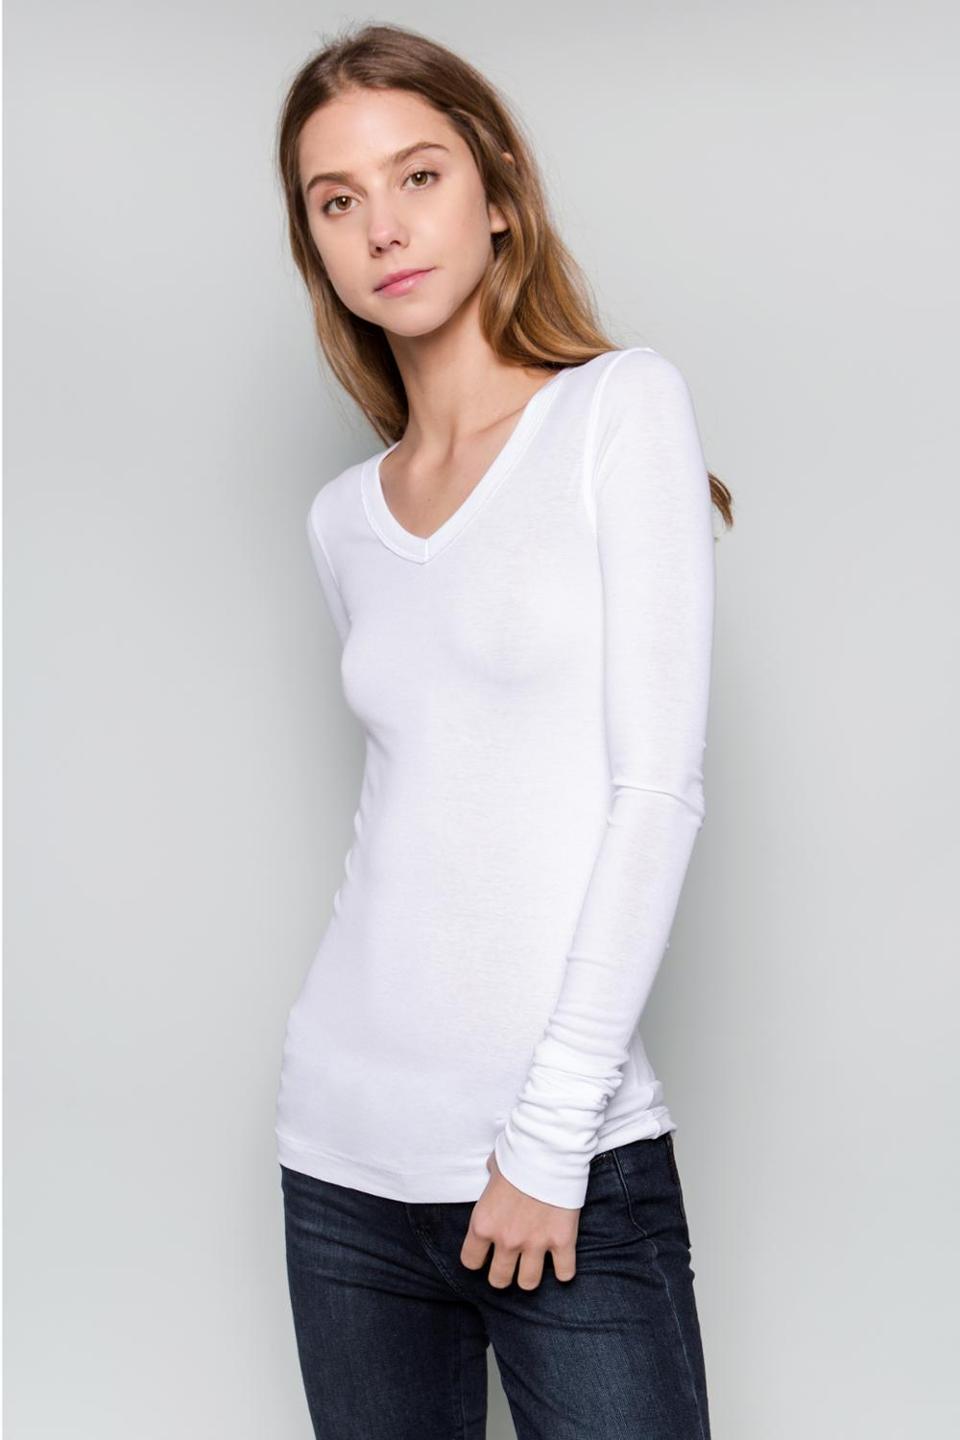 FLAGSHIP-L/S V-Neck [Clean-Edge] by Crown Jewel Brand